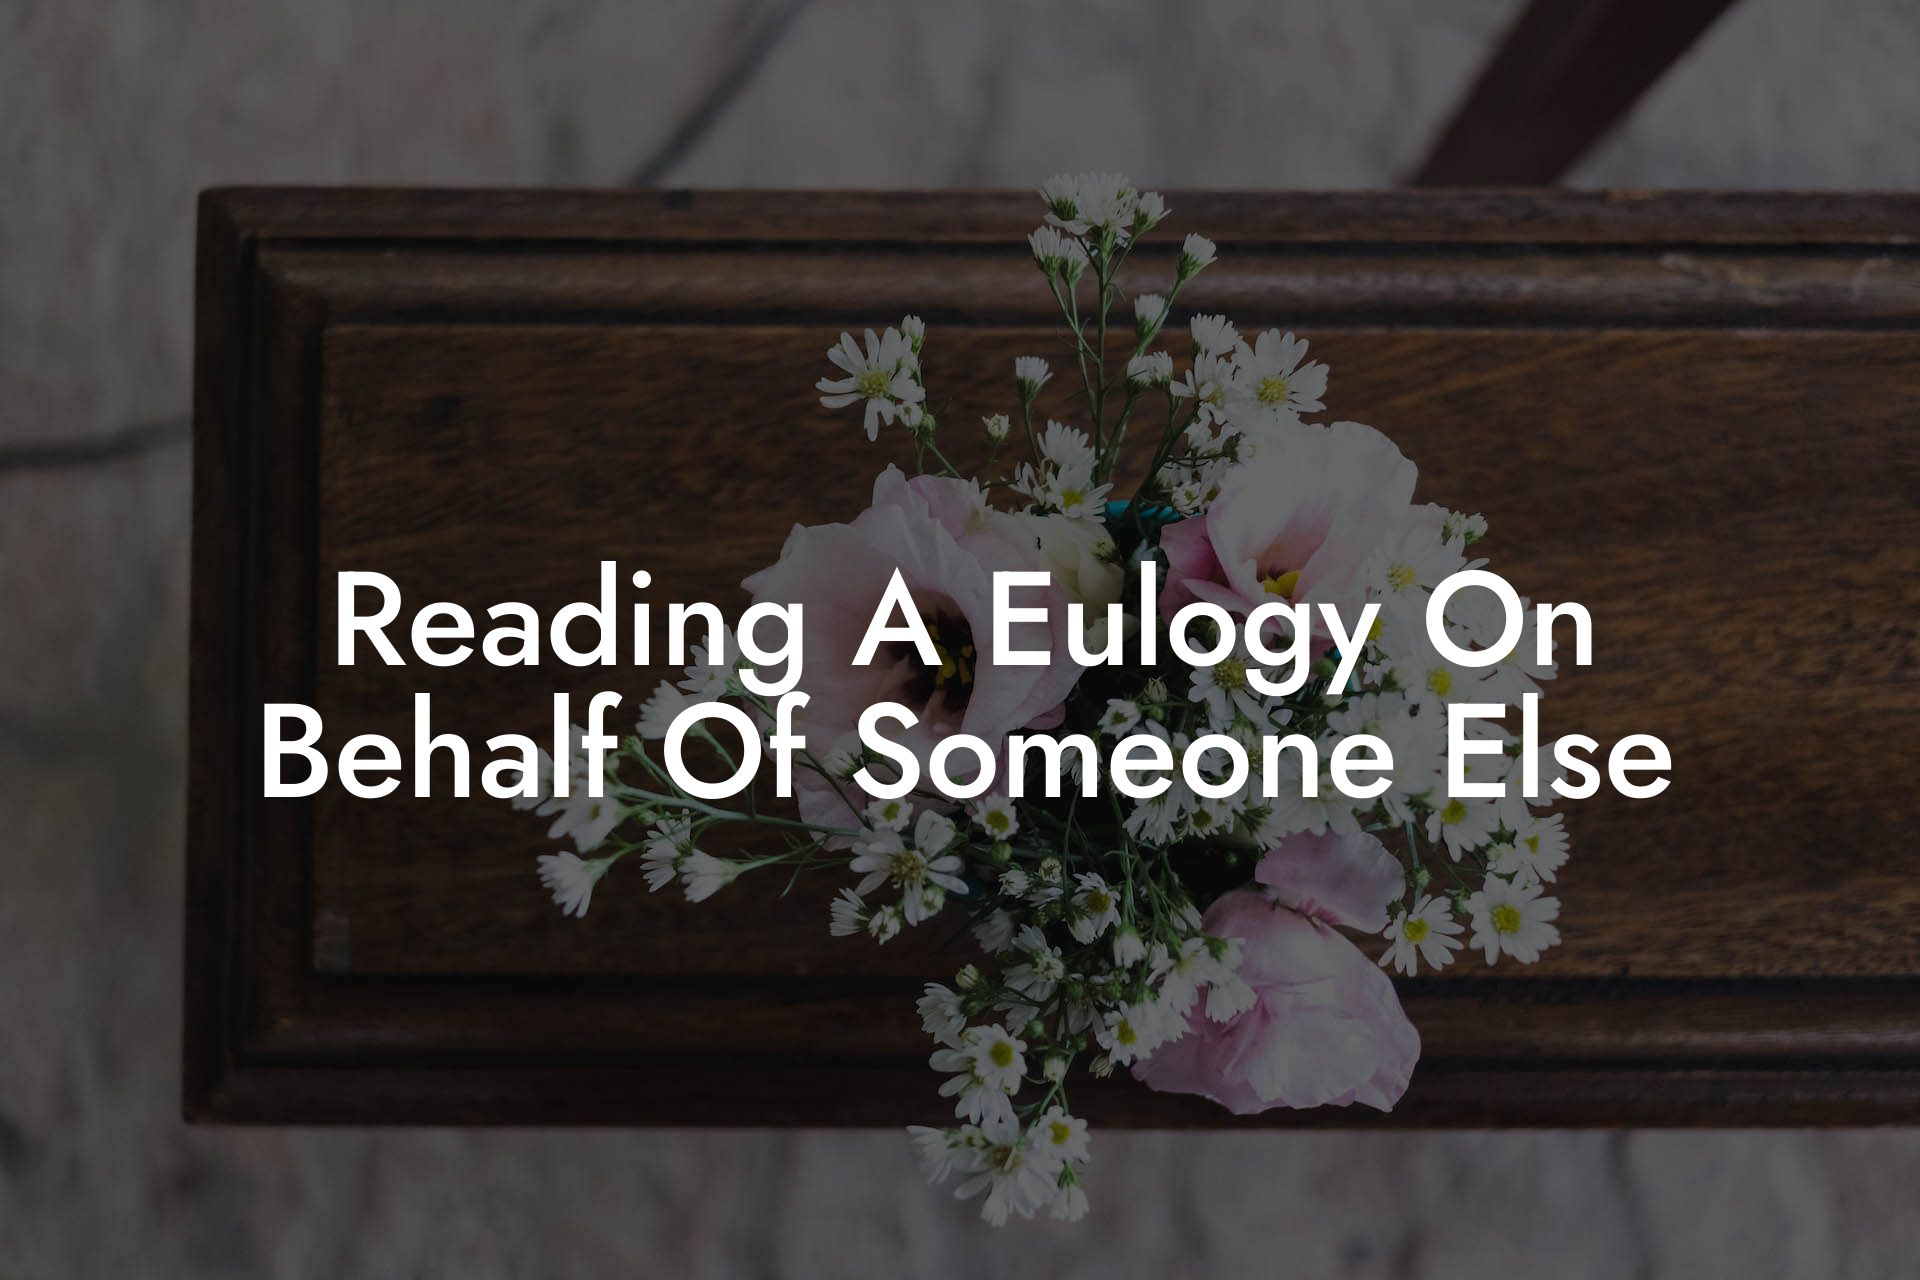 Reading A Eulogy On Behalf Of Someone Else